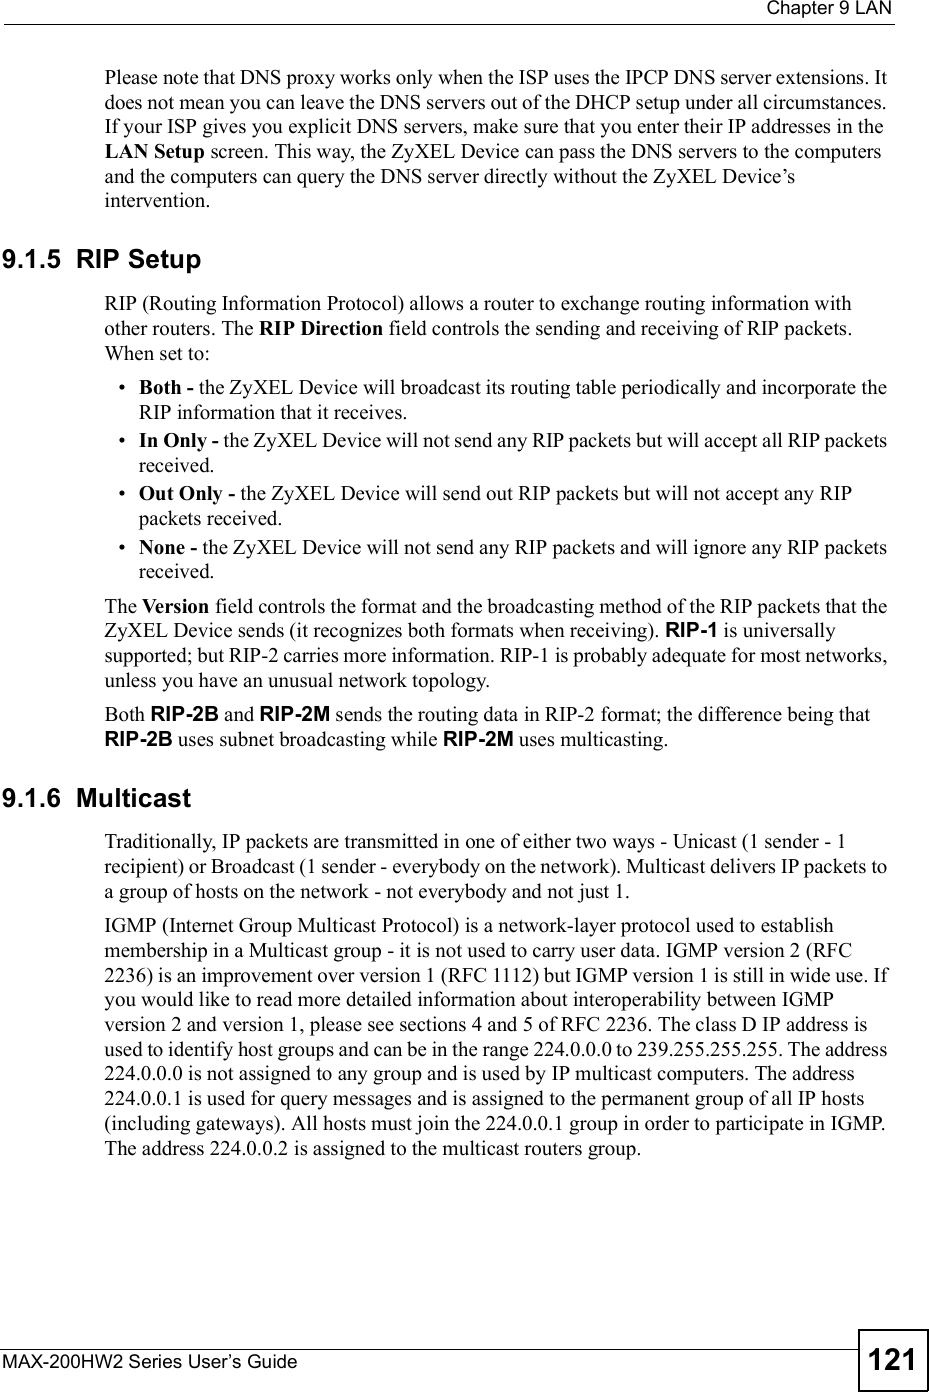  Chapter 9LANMAX-200HW2 Series User s Guide 121Please note that DNS proxy works only when the ISP uses the IPCP DNS server extensions. It does not mean you can leave the DNS servers out of the DHCP setup under all circumstances. If your ISP gives you explicit DNS servers, make sure that you enter their IP addresses in the LAN Setup screen. This way, the ZyXEL Device can pass the DNS servers to the computers and the computers can query the DNS server directly without the ZyXEL Device!s intervention.9.1.5  RIP SetupRIP (Routing Information Protocol) allows a router to exchange routing information with other routers. The RIP Direction field controls the sending and receiving of RIP packets.  When set to: Both - the ZyXEL Device will broadcast its routing table periodically and incorporate the RIP information that it receives. In Only - the ZyXEL Device will not send any RIP packets but will accept all RIP packets received. Out Only - the ZyXEL Device will send out RIP packets but will not accept any RIP packets received. None - the ZyXEL Device will not send any RIP packets and will ignore any RIP packets received.The Version field controls the format and the broadcasting method of the RIP packets that the ZyXEL Device sends (it recognizes both formats when receiving). RIP-1 is universally supported; but RIP-2 carries more information. RIP-1 is probably adequate for most networks, unless you have an unusual network topology.Both RIP-2B and RIP-2M sends the routing data in RIP-2 format; the difference being that RIP-2B uses subnet broadcasting while RIP-2M uses multicasting.9.1.6  MulticastTraditionally, IP packets are transmitted in one of either two ways - Unicast (1 sender - 1 recipient) or Broadcast (1 sender - everybody on the network). Multicast delivers IP packets to a group of hosts on the network - not everybody and not just 1.IGMP (Internet Group Multicast Protocol) is a network-layer protocol used to establish membership in a Multicast group - it is not used to carry user data. IGMP version 2 (RFC 2236) is an improvement over version 1 (RFC 1112) but IGMP version 1 is still in wide use. If you would like to read more detailed information about interoperability between IGMP version 2 and version 1, please see sections 4 and 5 of RFC 2236. The class D IP address is used to identify host groups and can be in the range 224.0.0.0 to 239.255.255.255. The address 224.0.0.0 is not assigned to any group and is used by IP multicast computers. The address 224.0.0.1 is used for query messages and is assigned to the permanent group of all IP hosts (including gateways). All hosts must join the 224.0.0.1 group in order to participate in IGMP. The address 224.0.0.2 is assigned to the multicast routers group.